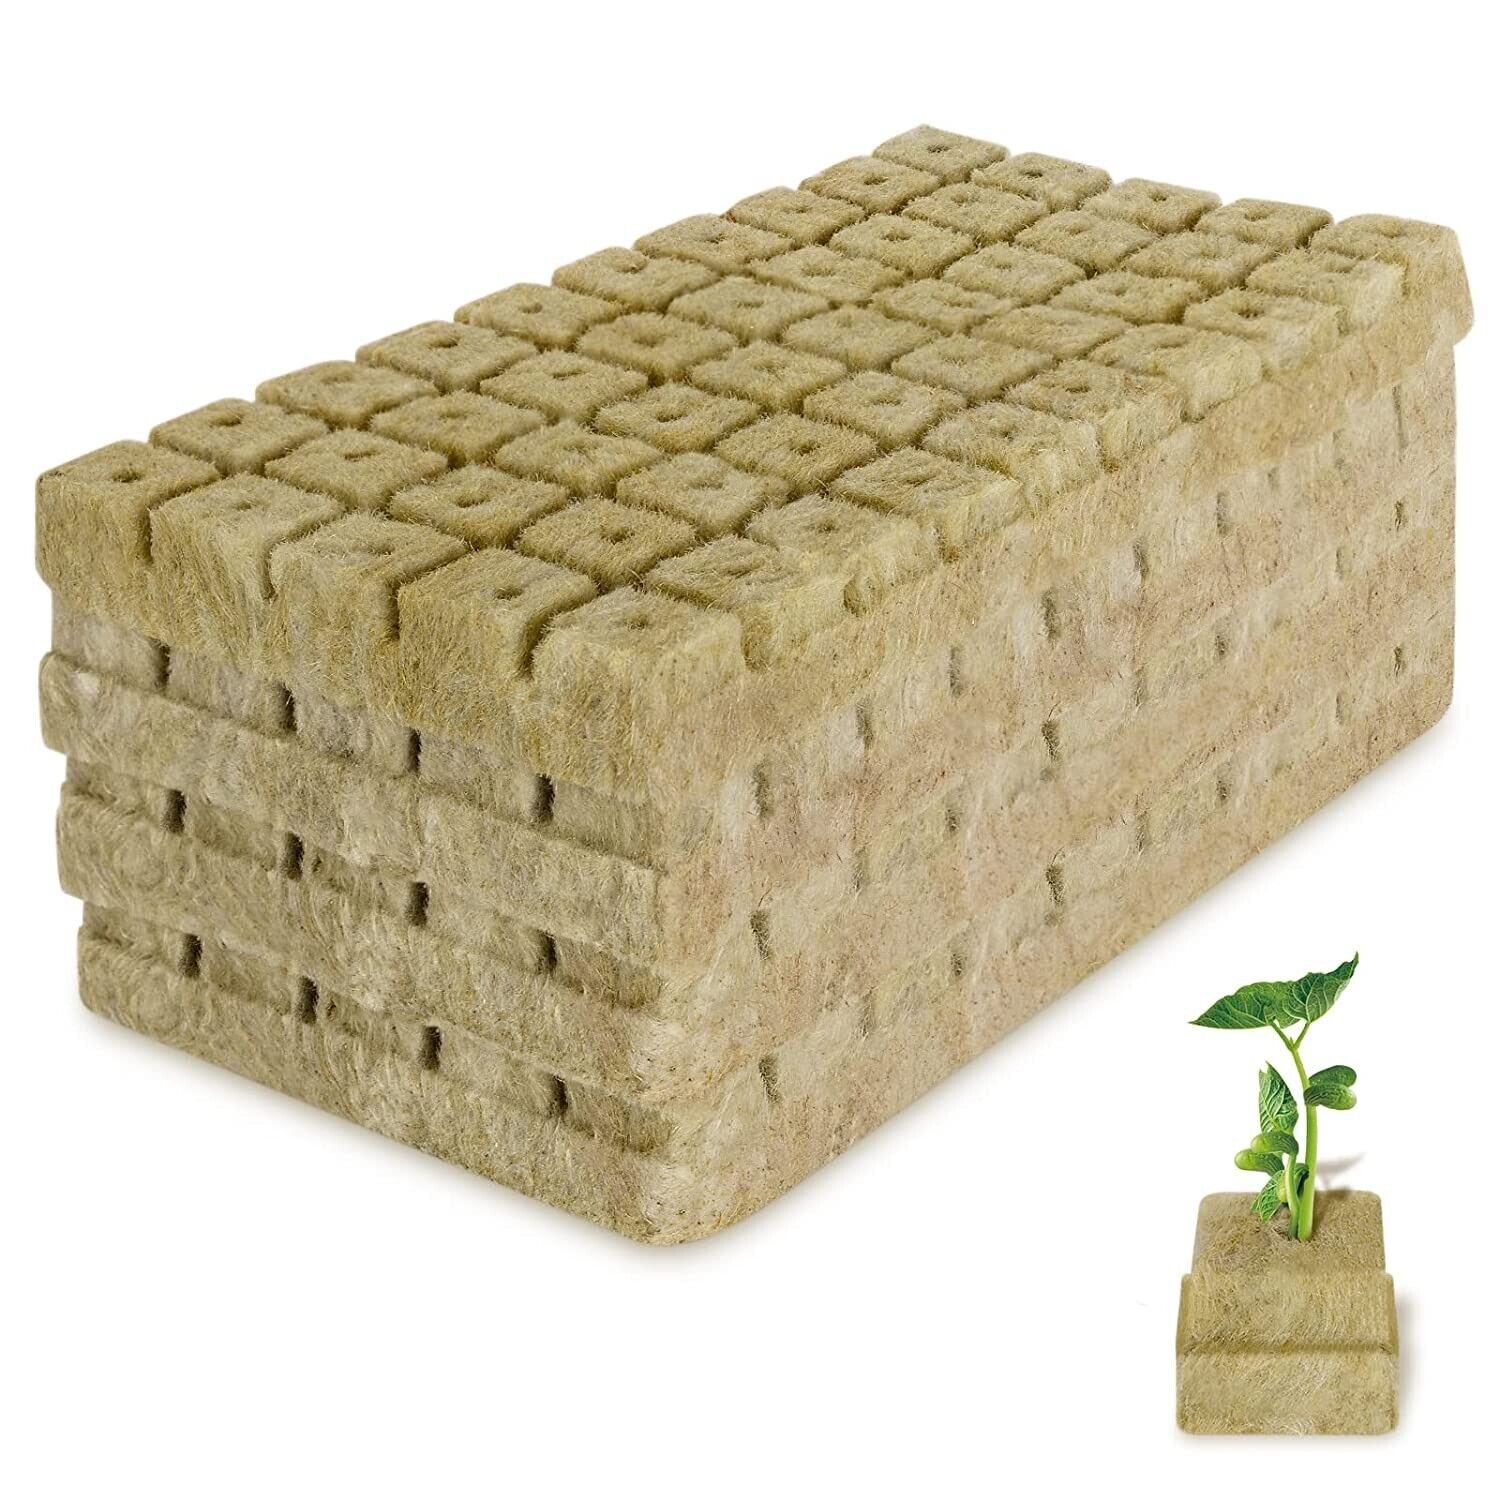 4 Sheets Rockwool Grow Cubes for Rooting, Cuttings, Clone Plants, 200 Plugs